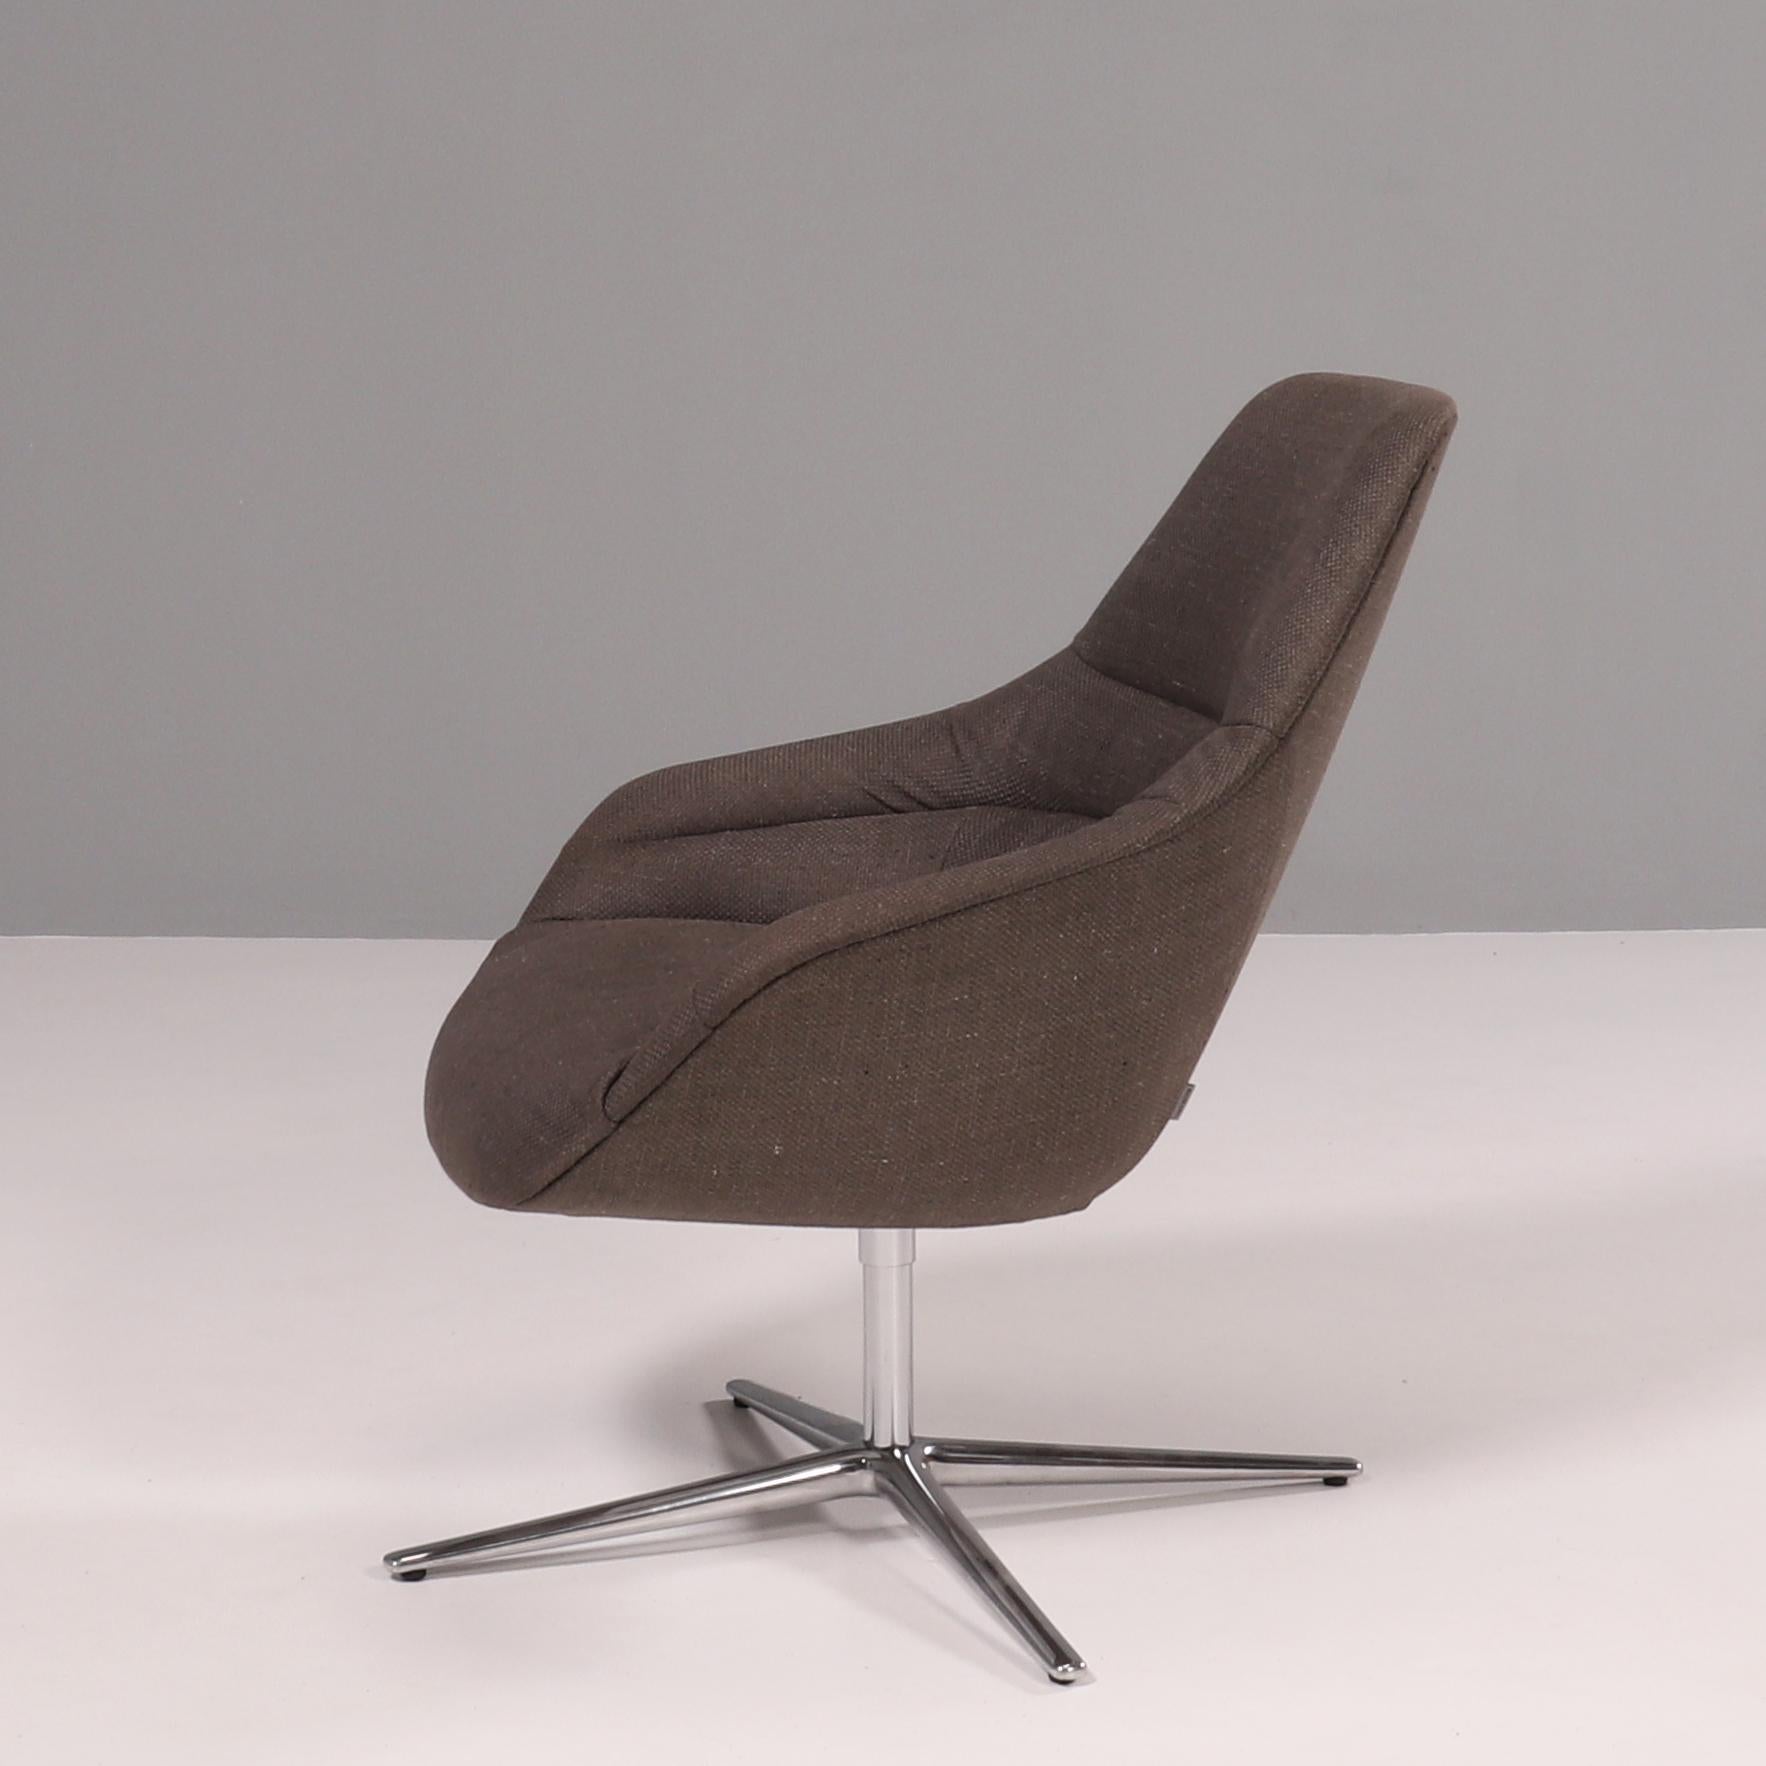 Designed by PearsonLlyod for Walter Knoll, the Kyo lounge chair offers the perfect balance of comfort and style.

The moulded bucket seat features a high back and is curved to create integrated back and armrests.

Fully upholstered in ‘Timber’ woven